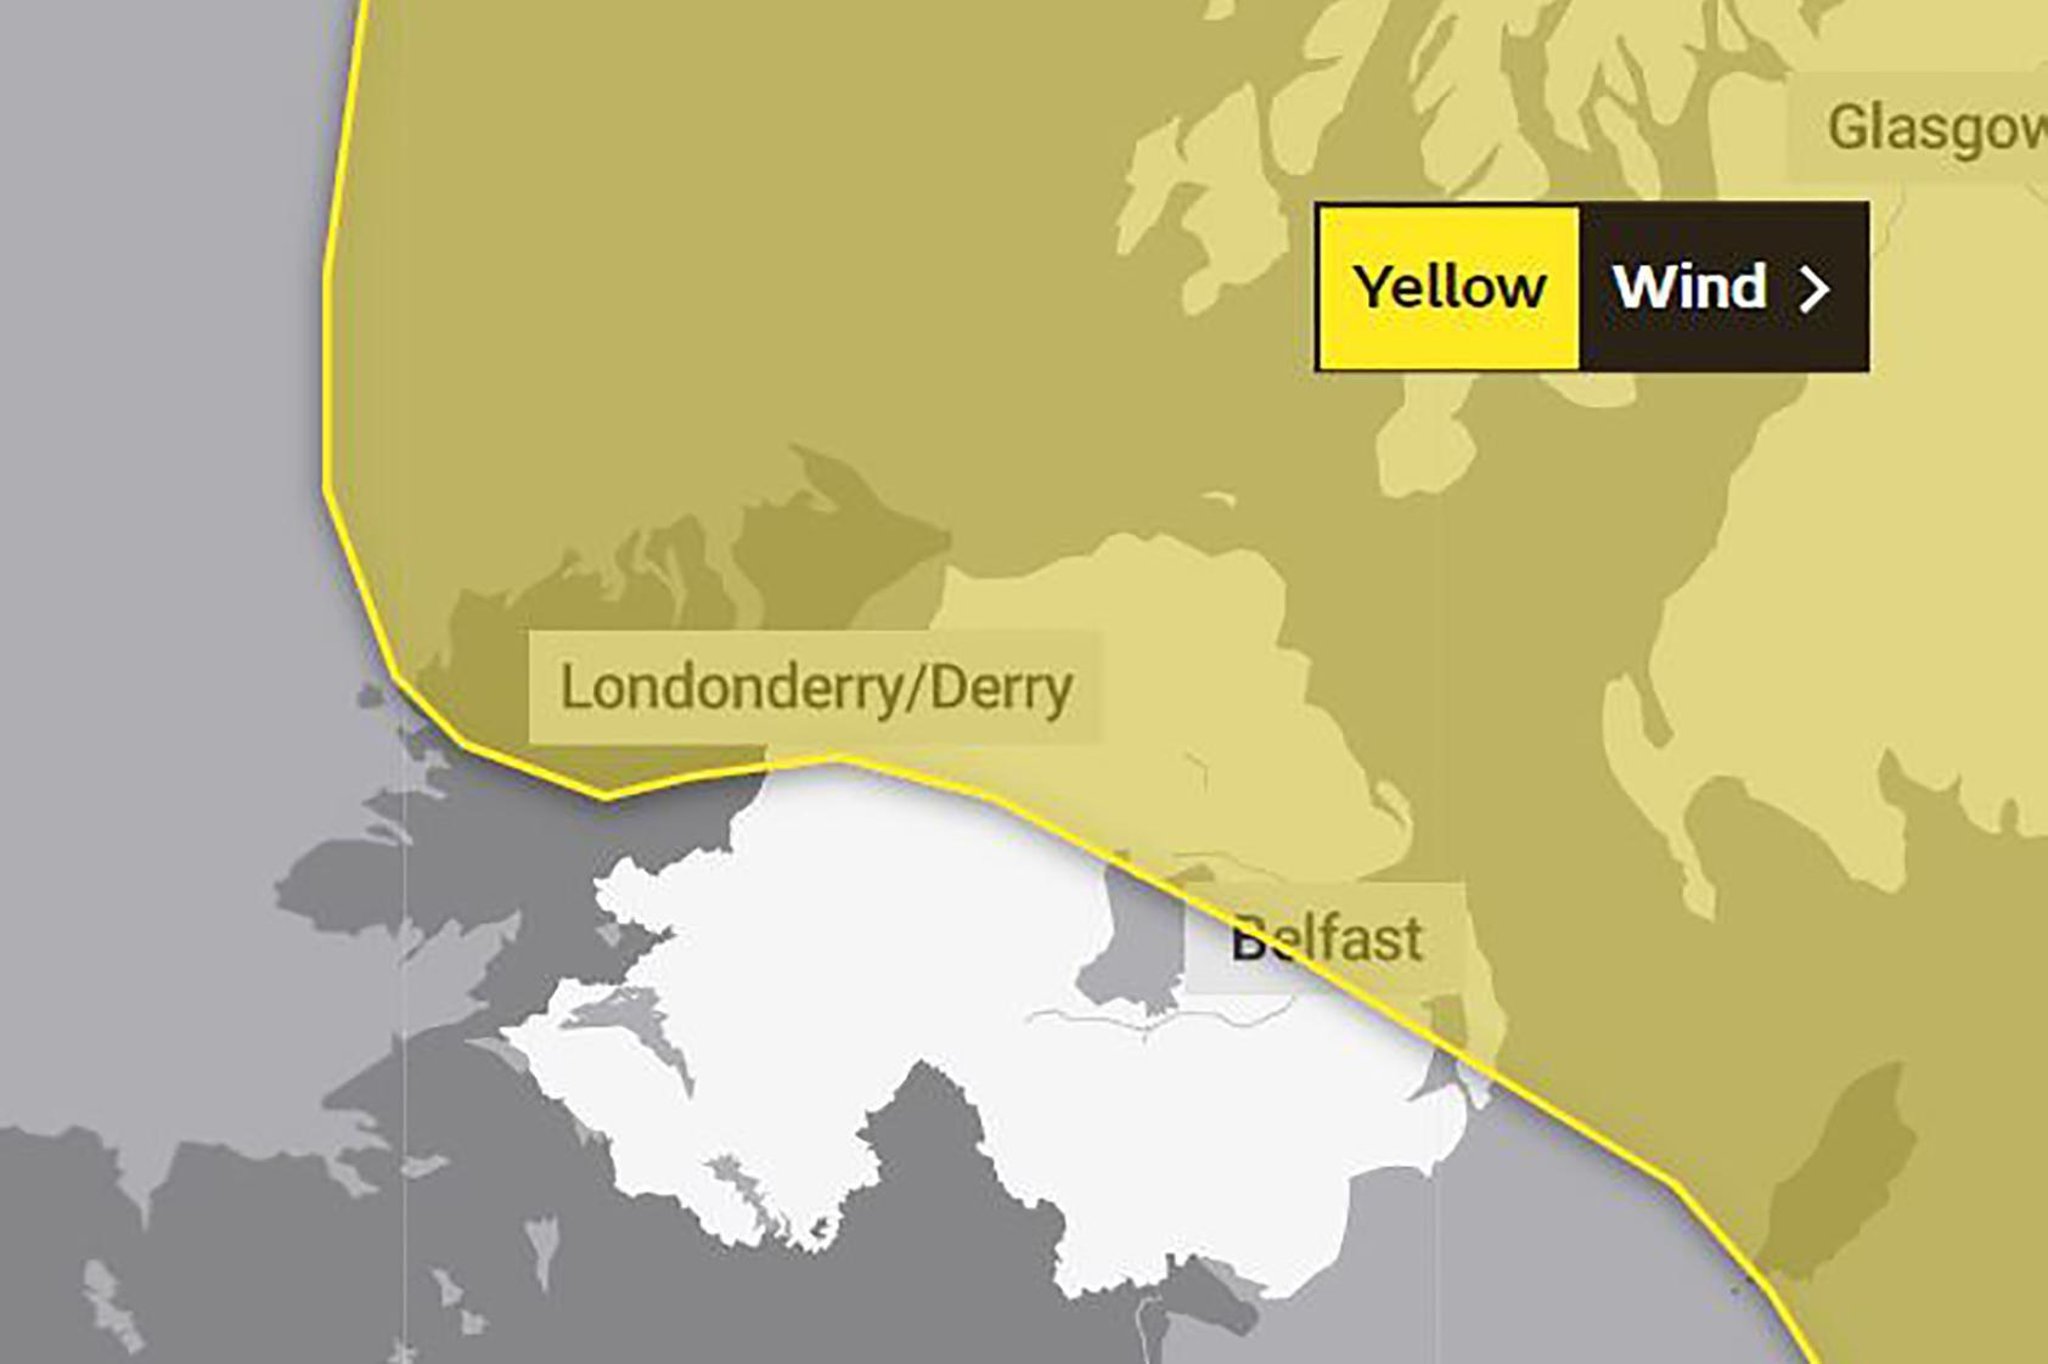 Yellow weather warning issued by the Met Office for parts of Northern Ireland &#8211; High winds forecast